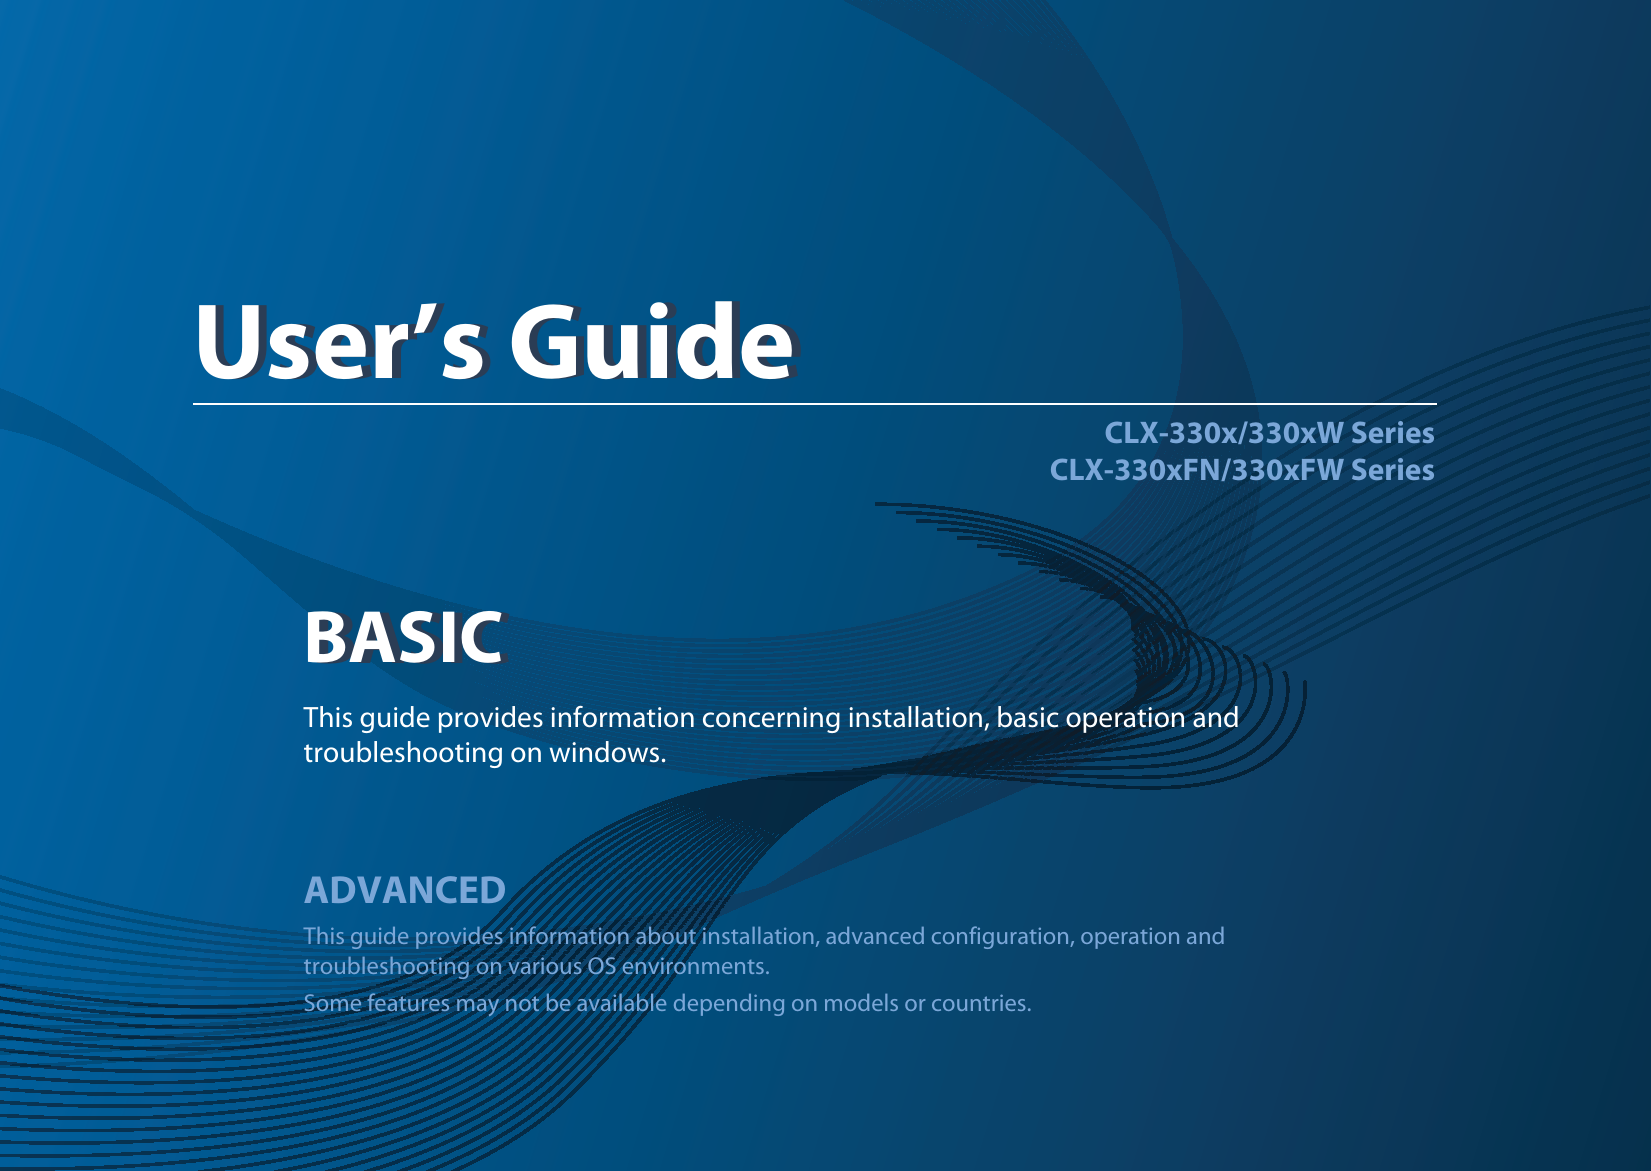 BASICUser’s GuideCLX-330x/330xW SeriesCLX-330xFN/330xFW SeriesBASICUser’s GuideThis guide provides information concerning installation, basic operation and troubleshooting on windows.ADVANCEDThis guide provides information about installation, advanced configuration, operation and troubleshooting on various OS environments. Some features may not be available depending on models or countries.